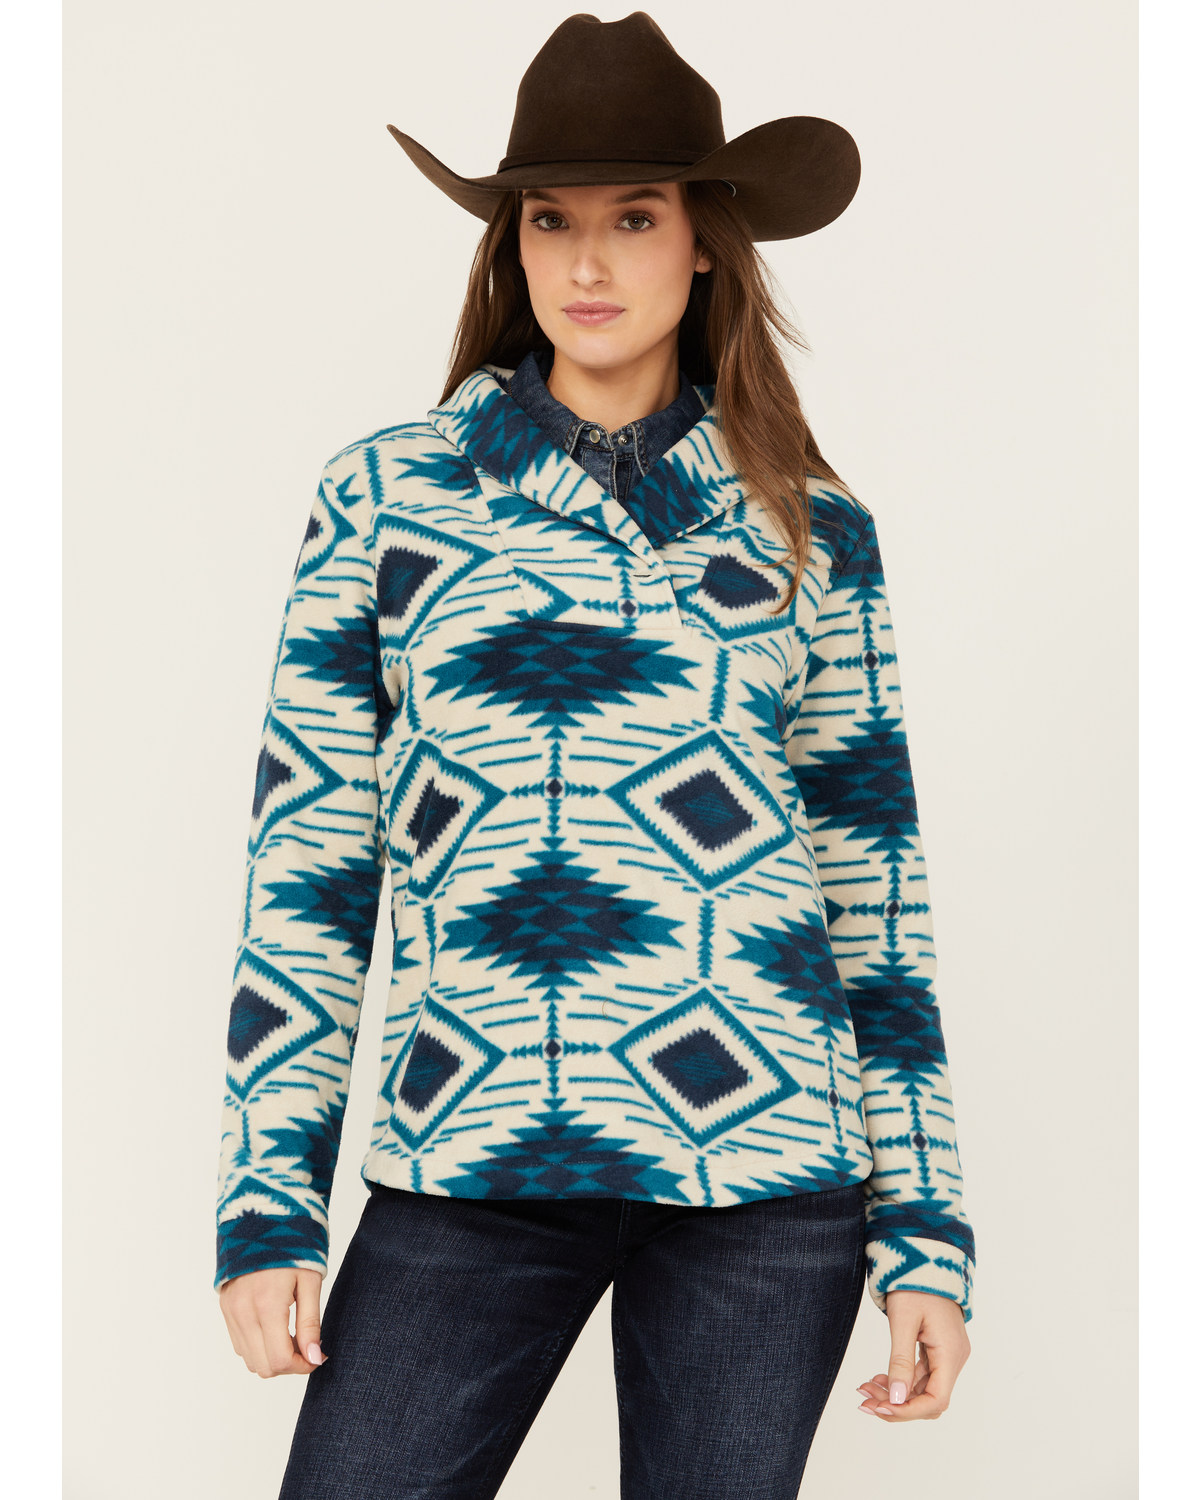 Outback Trading Co Women's Janet Pullover